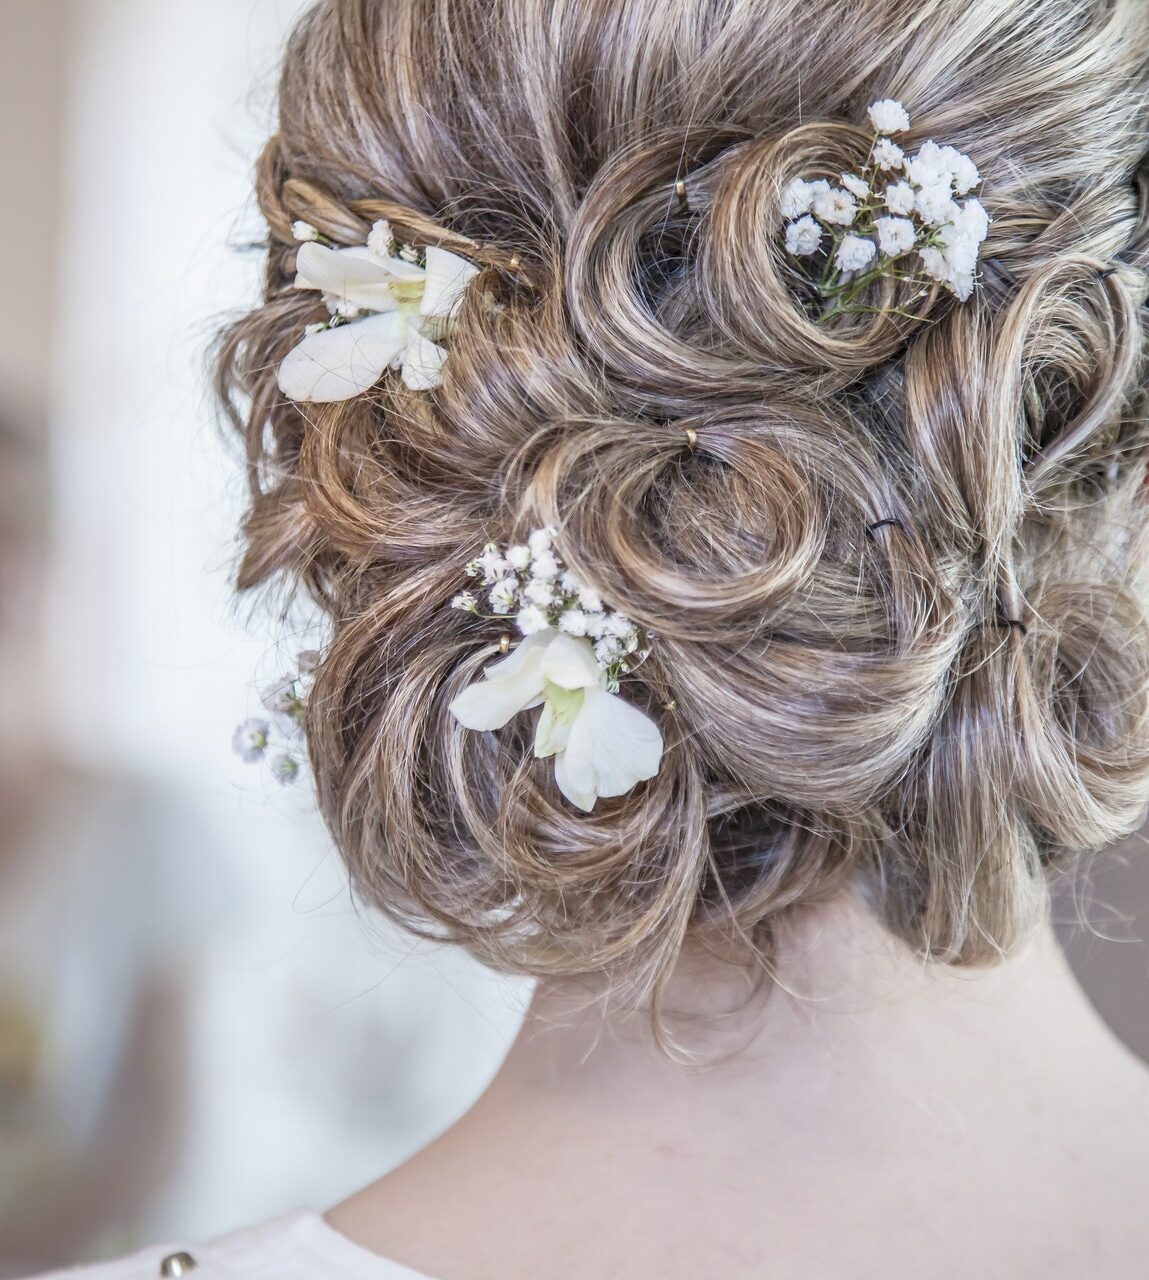 Style Without Sheen: Products to Help You Nail Your Wedding-Day Look